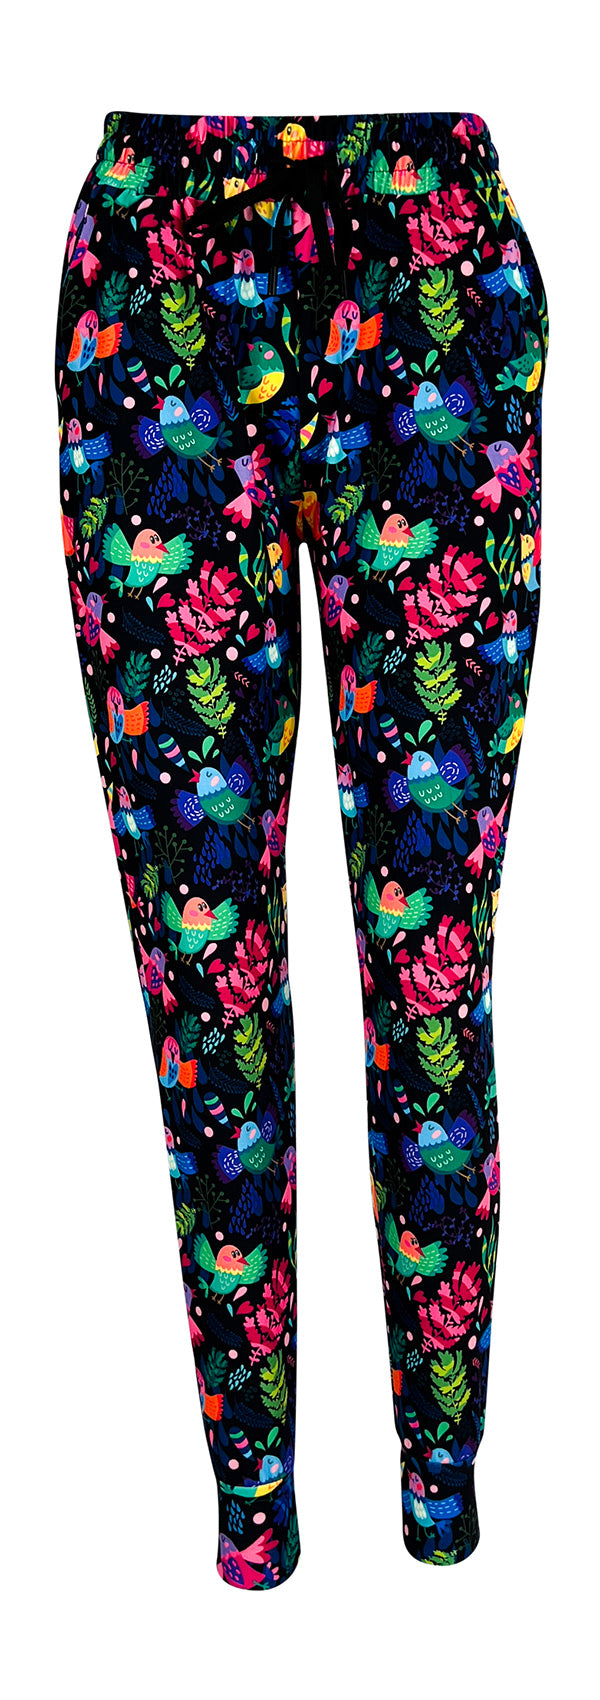 Singing Songbirds Lejoggers-Joggers